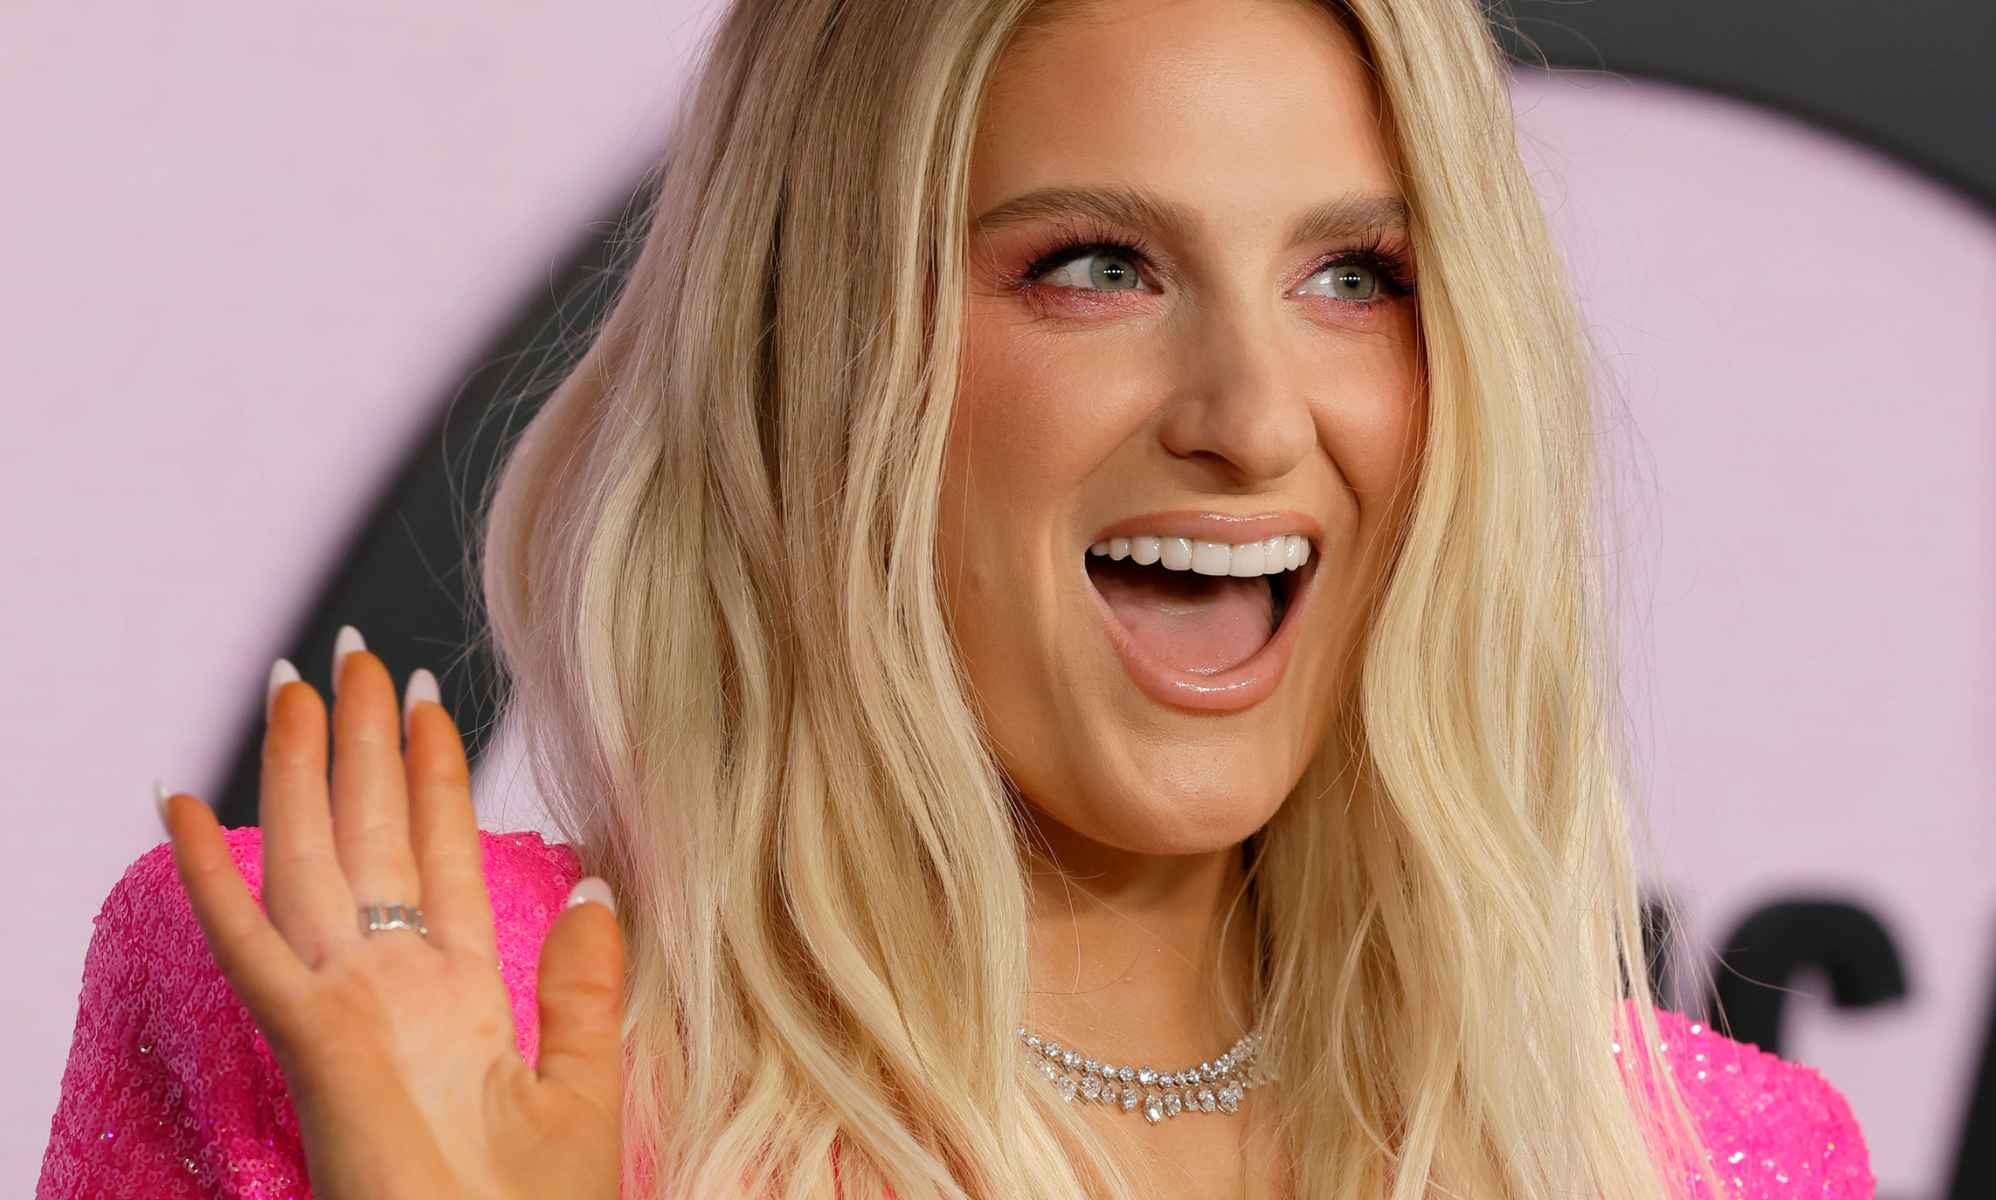 Pop Crave on X: Meghan Trainor's Made You Look wins the award